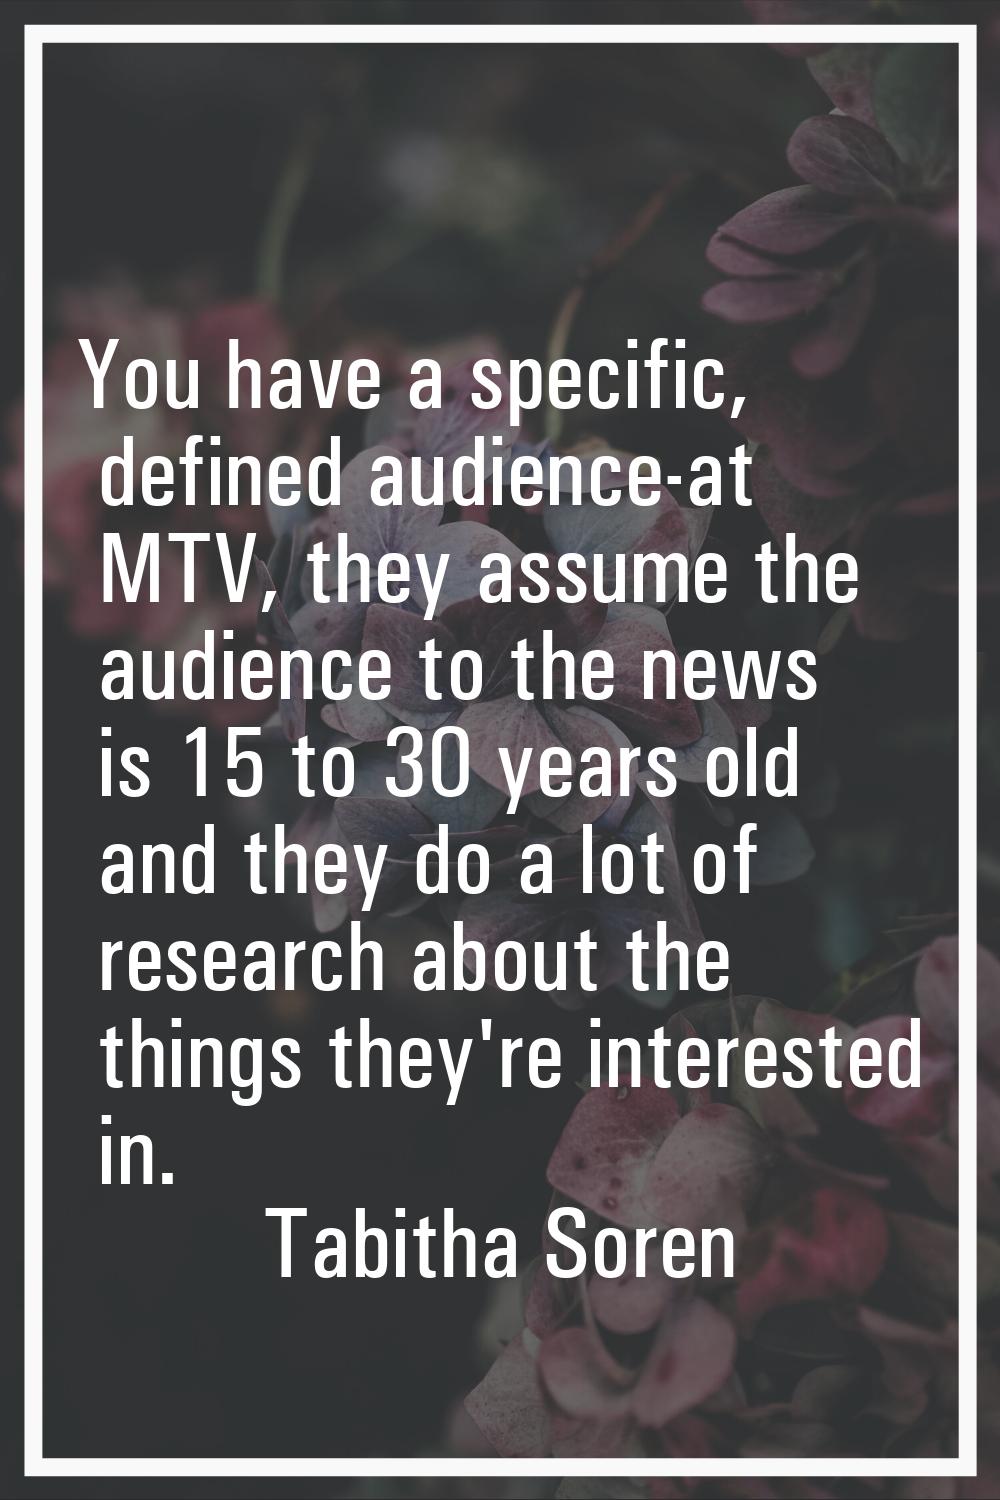 You have a specific, defined audience-at MTV, they assume the audience to the news is 15 to 30 year